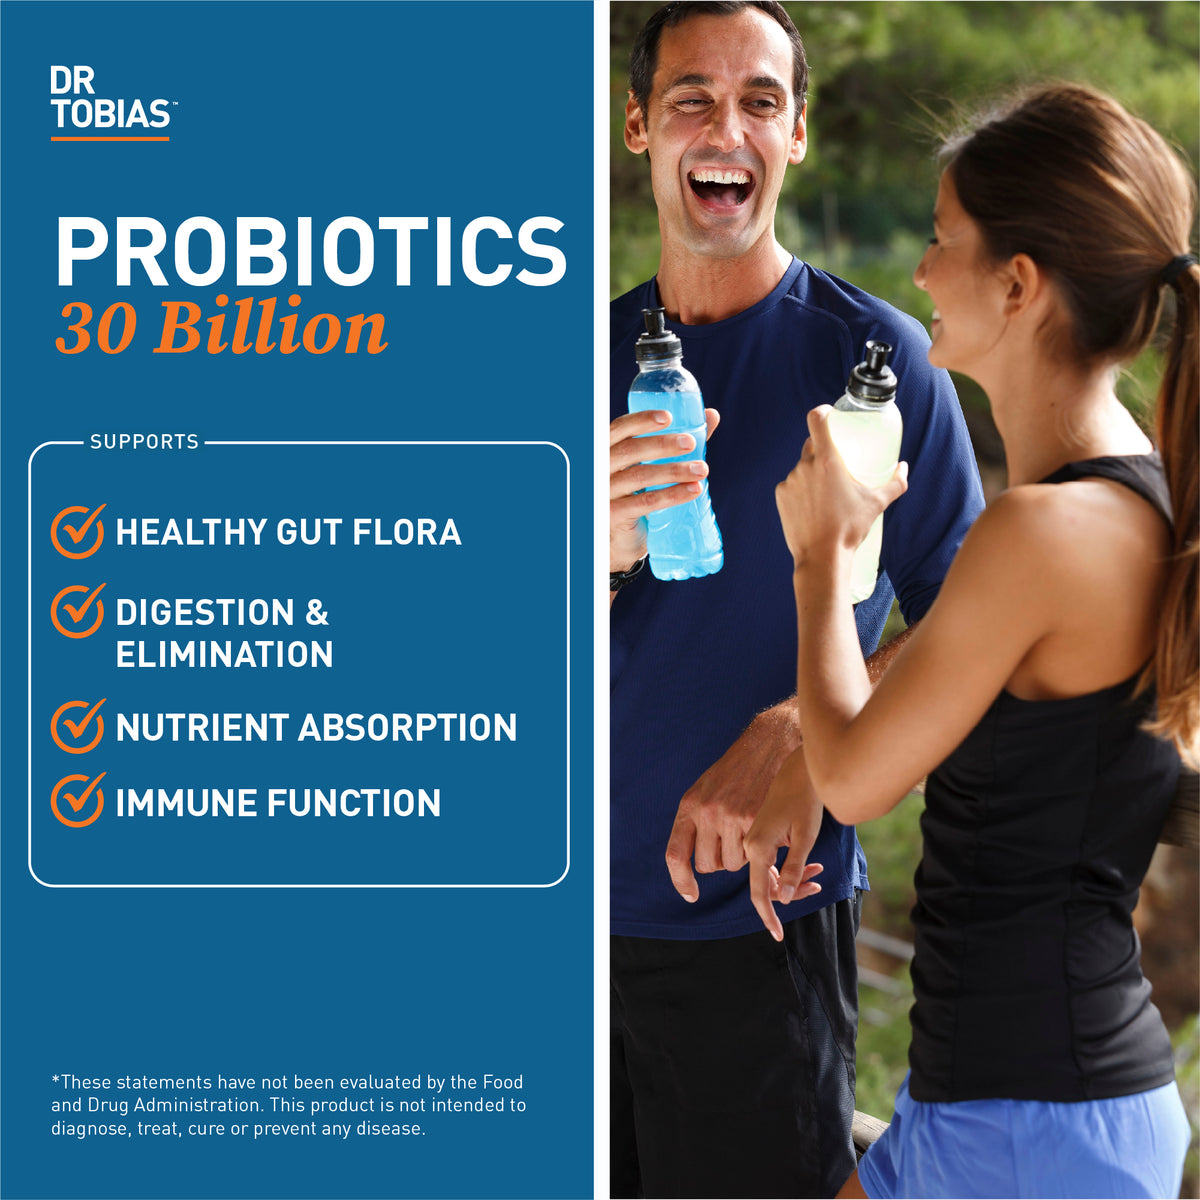 probiotics 30 billion supports healthy gut flora, digestion and elimination, nutrient absorption and immune function